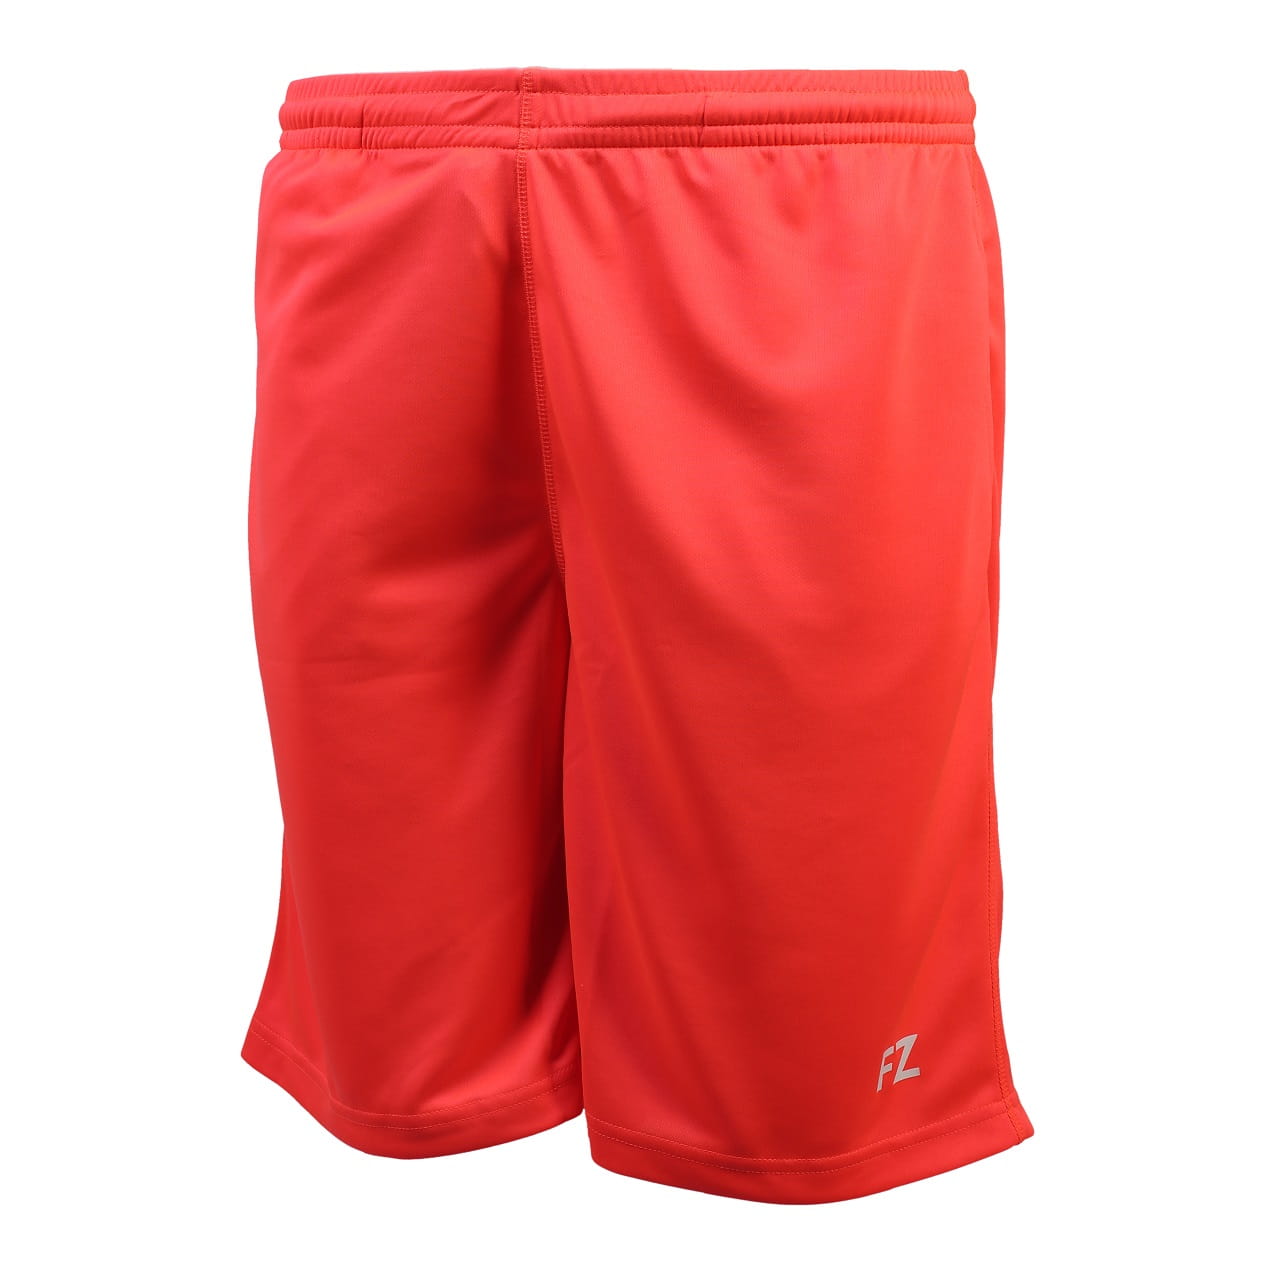 Landers Shorts (Chinese Red)